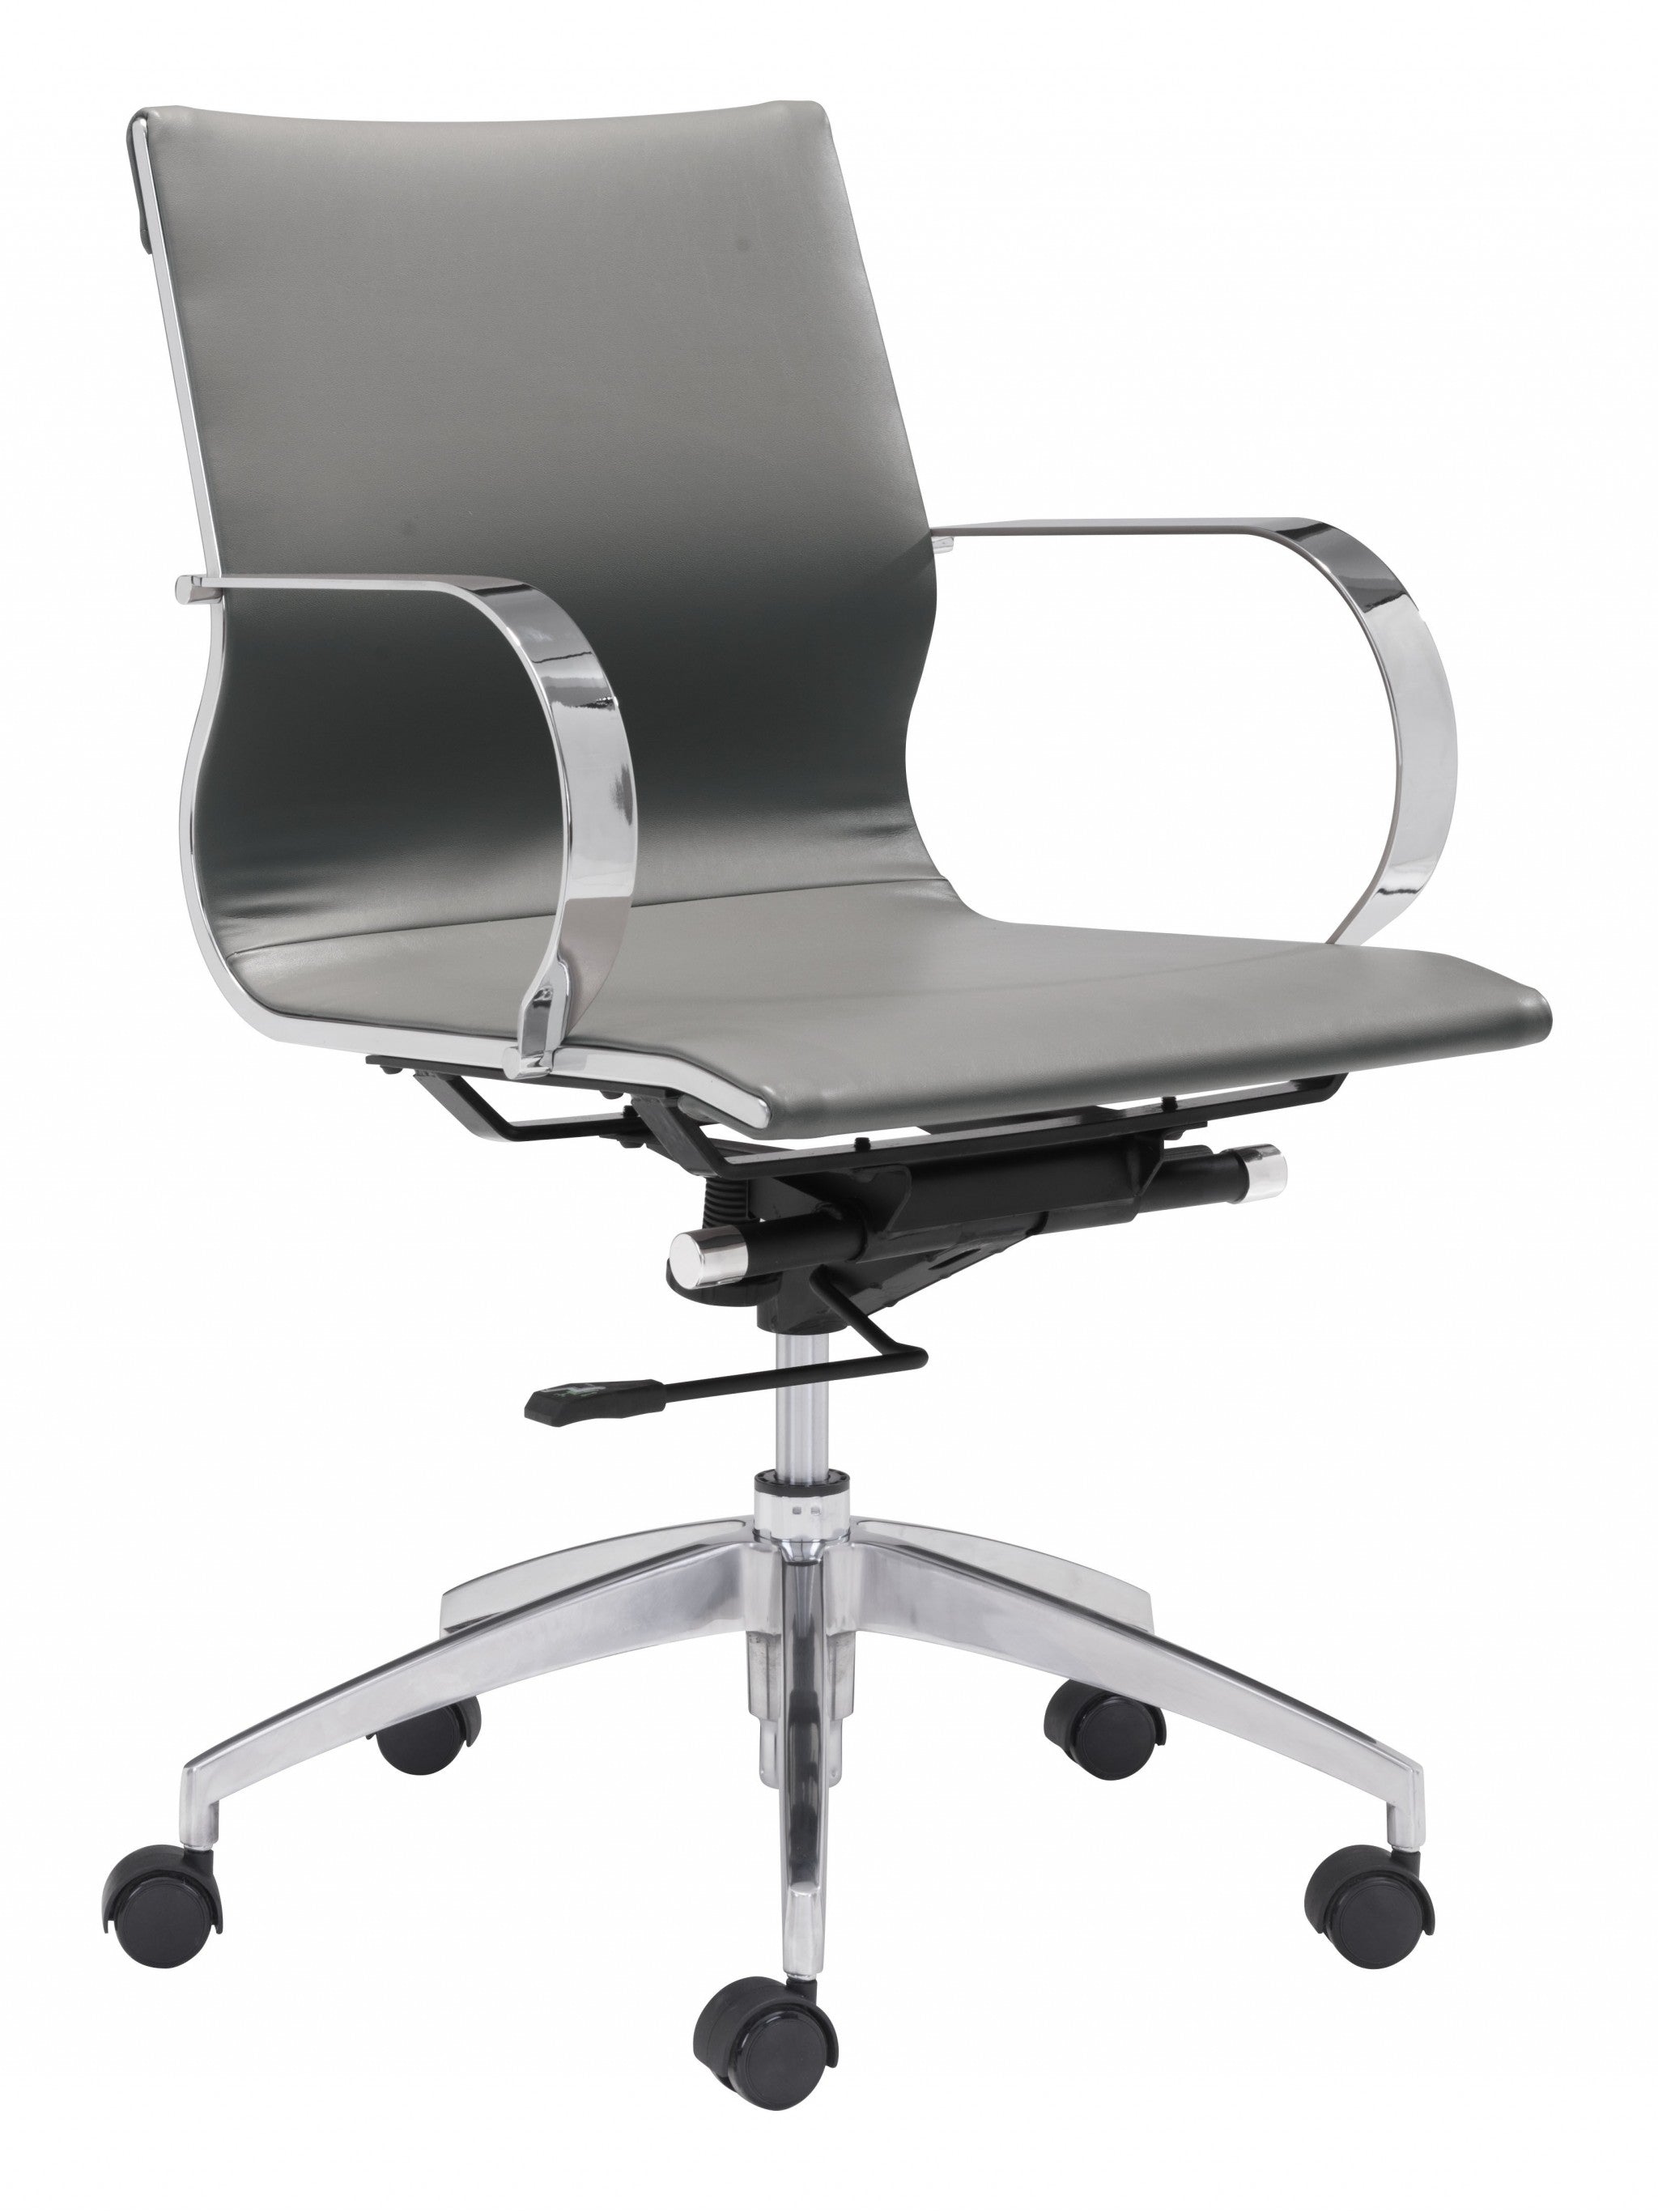 Gray Faux Leather Seat Swivel Adjustable Conference Chair Metal Back Steel Frame